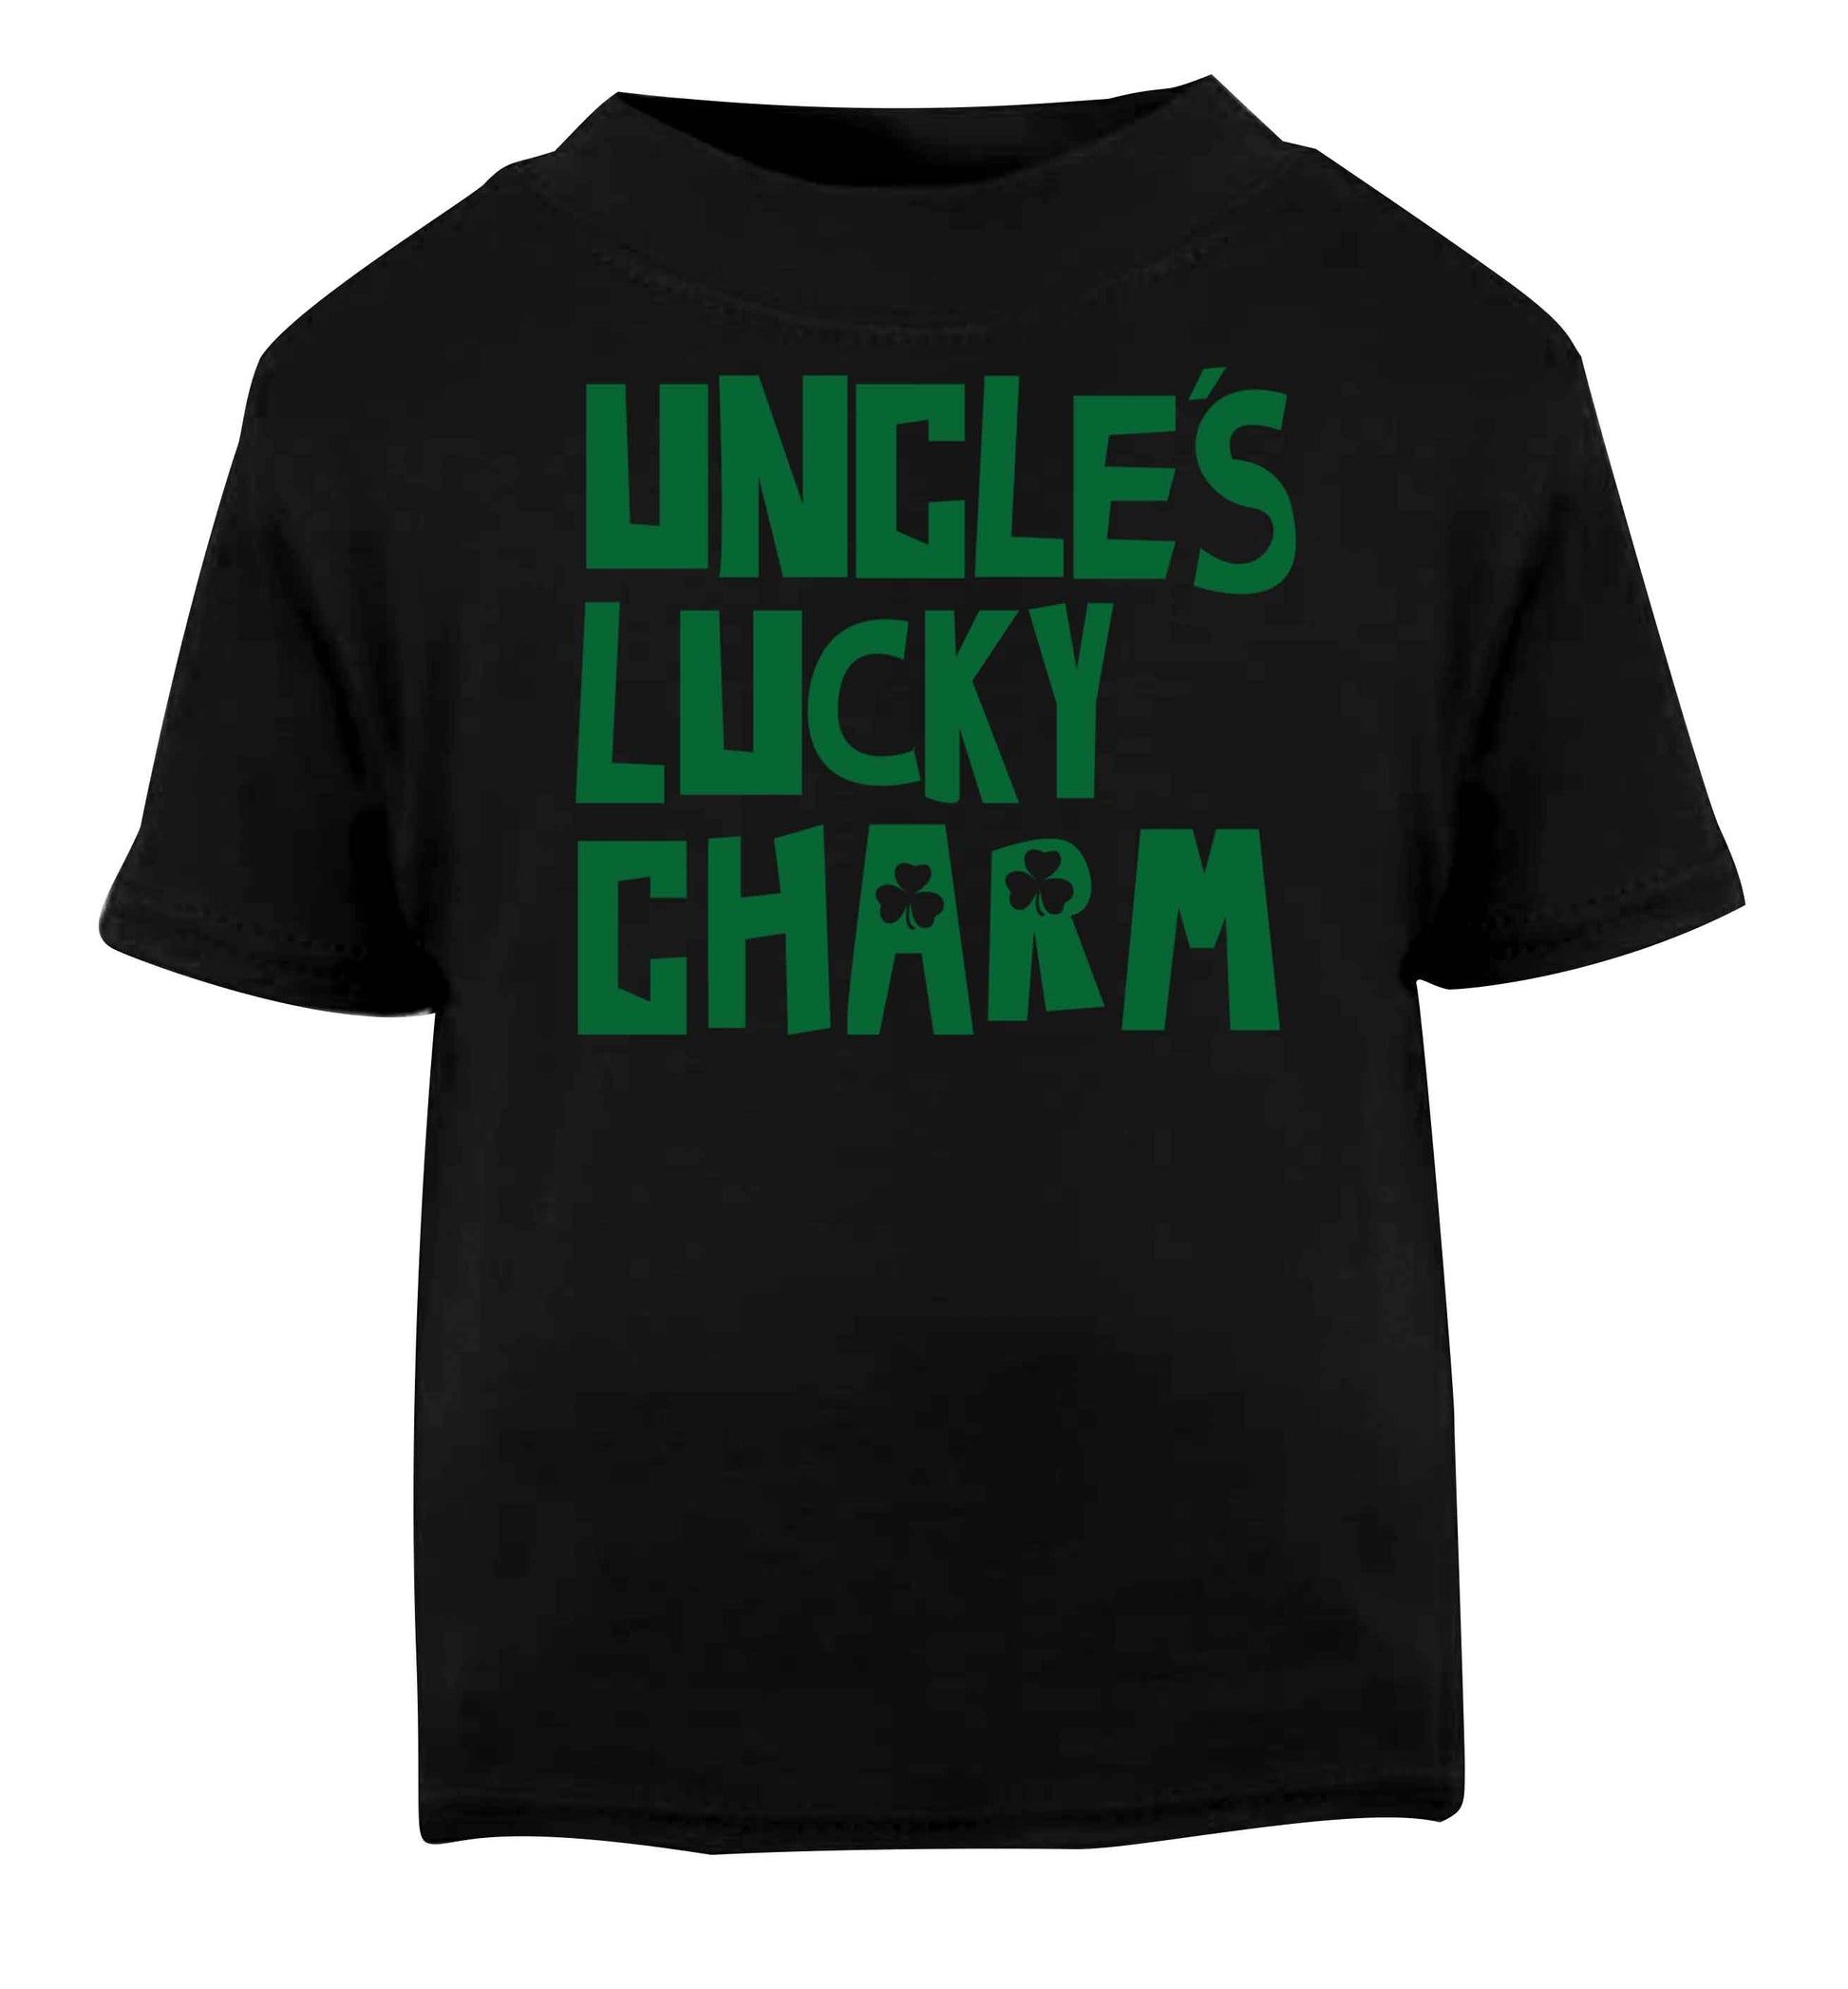 Uncles lucky charm Black baby toddler Tshirt 2 years